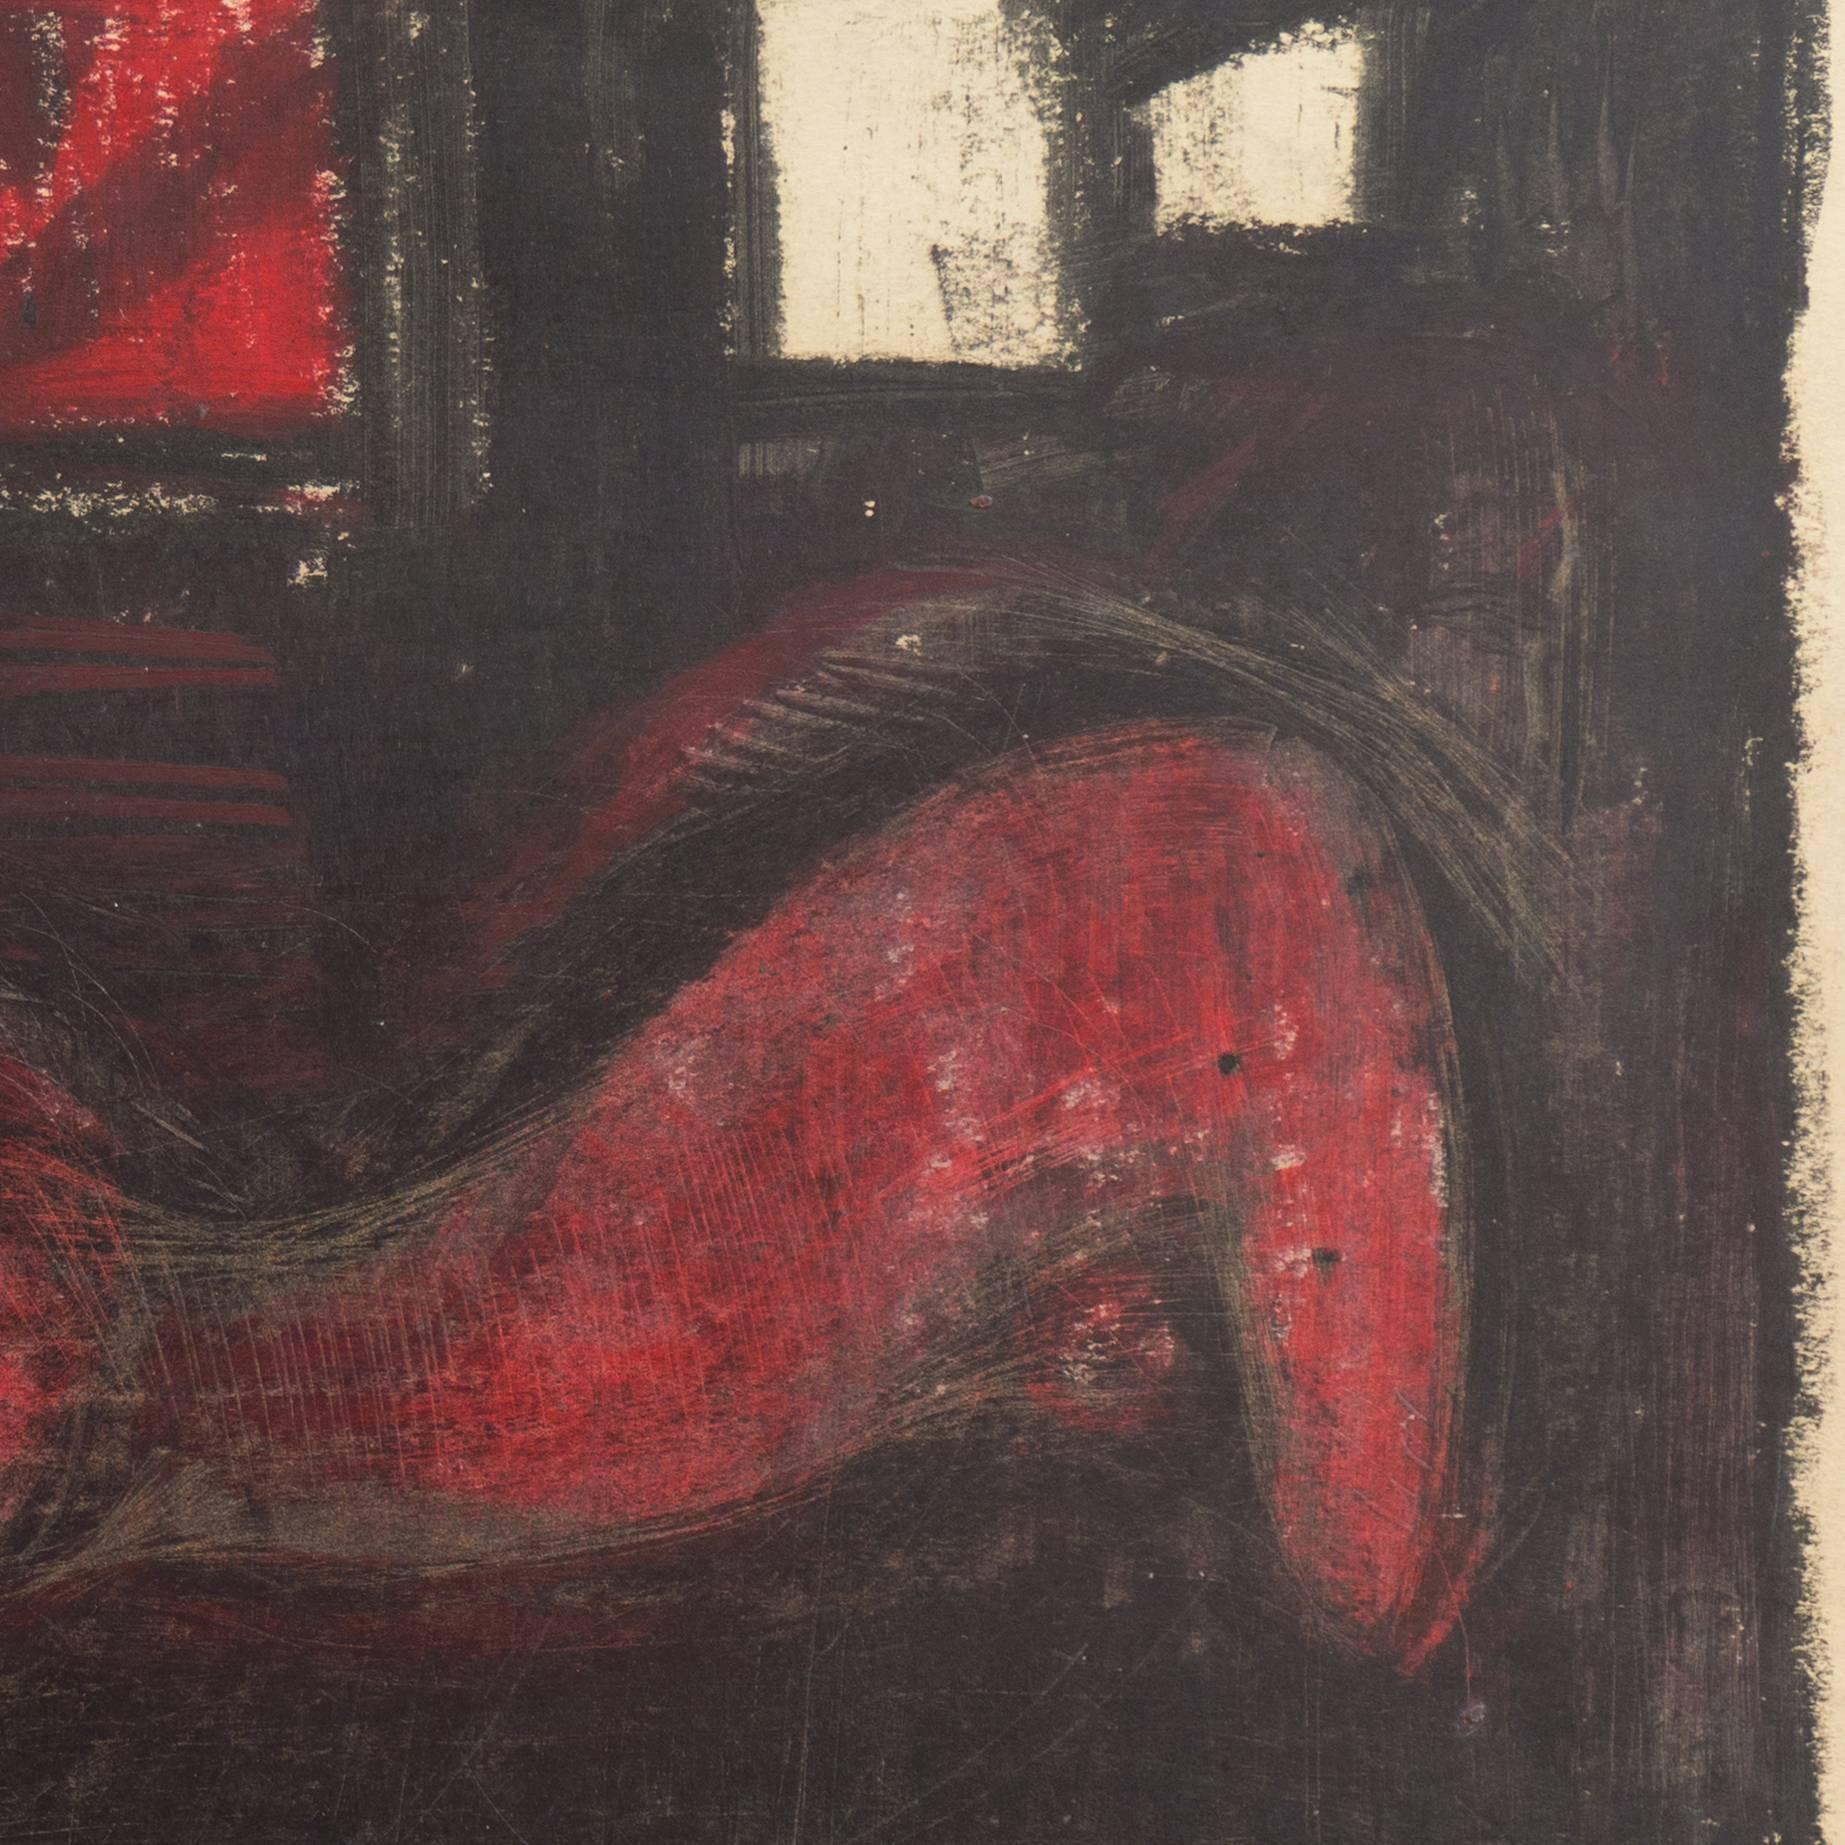 Signed lower right, 'Gilberg' and painted circa 1955.

A woman, drawn in variegated shades of ruby and garnet red, poses on a bed with incised details.
 
Born in Oakland, Robert George Gilberg first studied at the Oakland Art Center during the